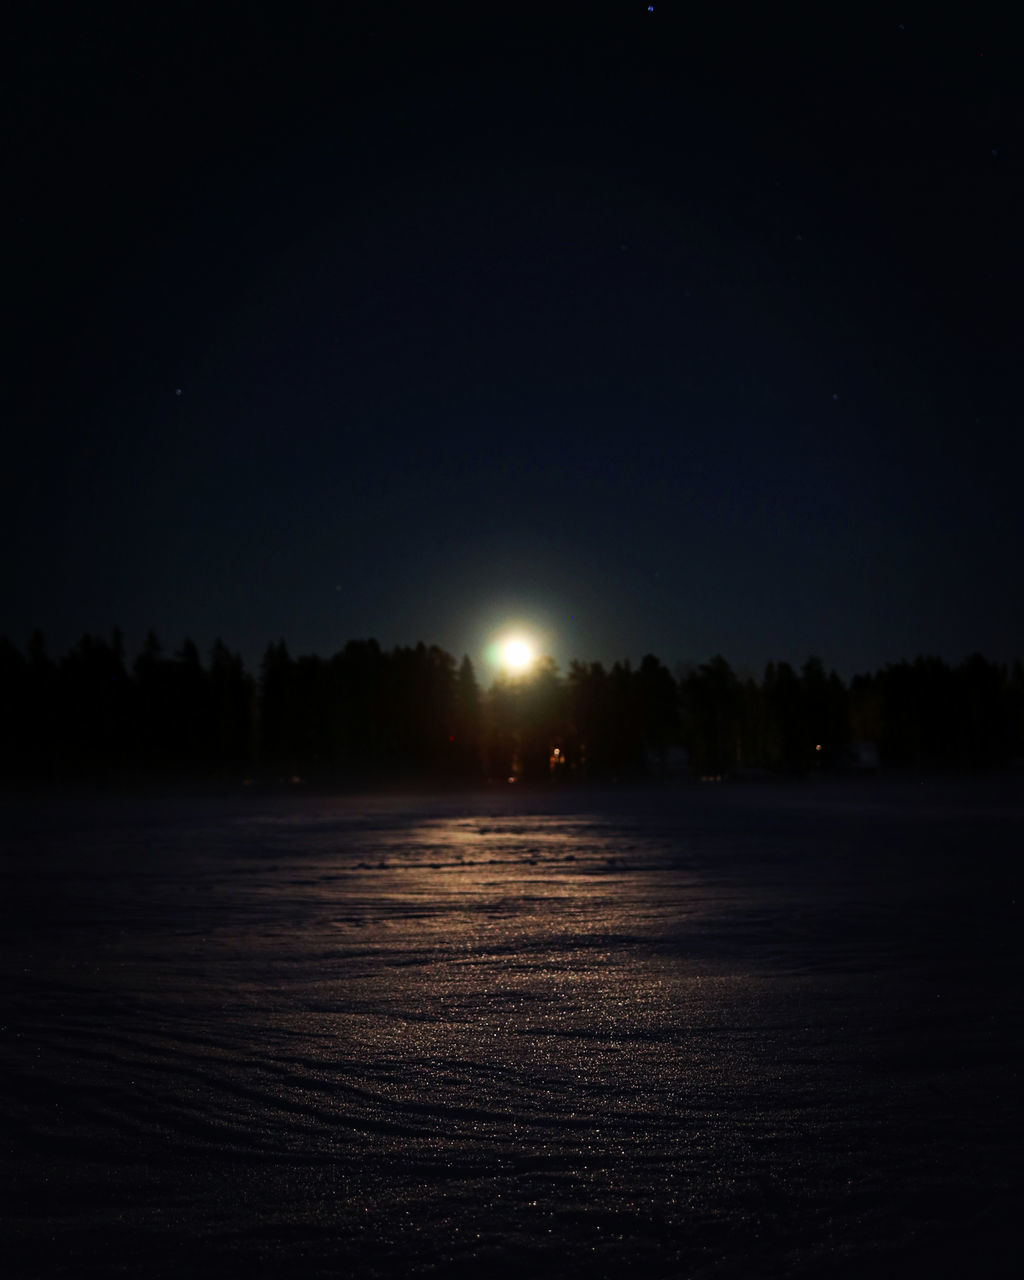 night, sky, moonlight, scenics - nature, tranquility, astronomical object, beauty in nature, nature, darkness, tranquil scene, water, no people, star, space, moon, light, astronomy, dawn, illuminated, tree, idyllic, outdoors, evening, silhouette, dark, lake, reflection, landscape, environment